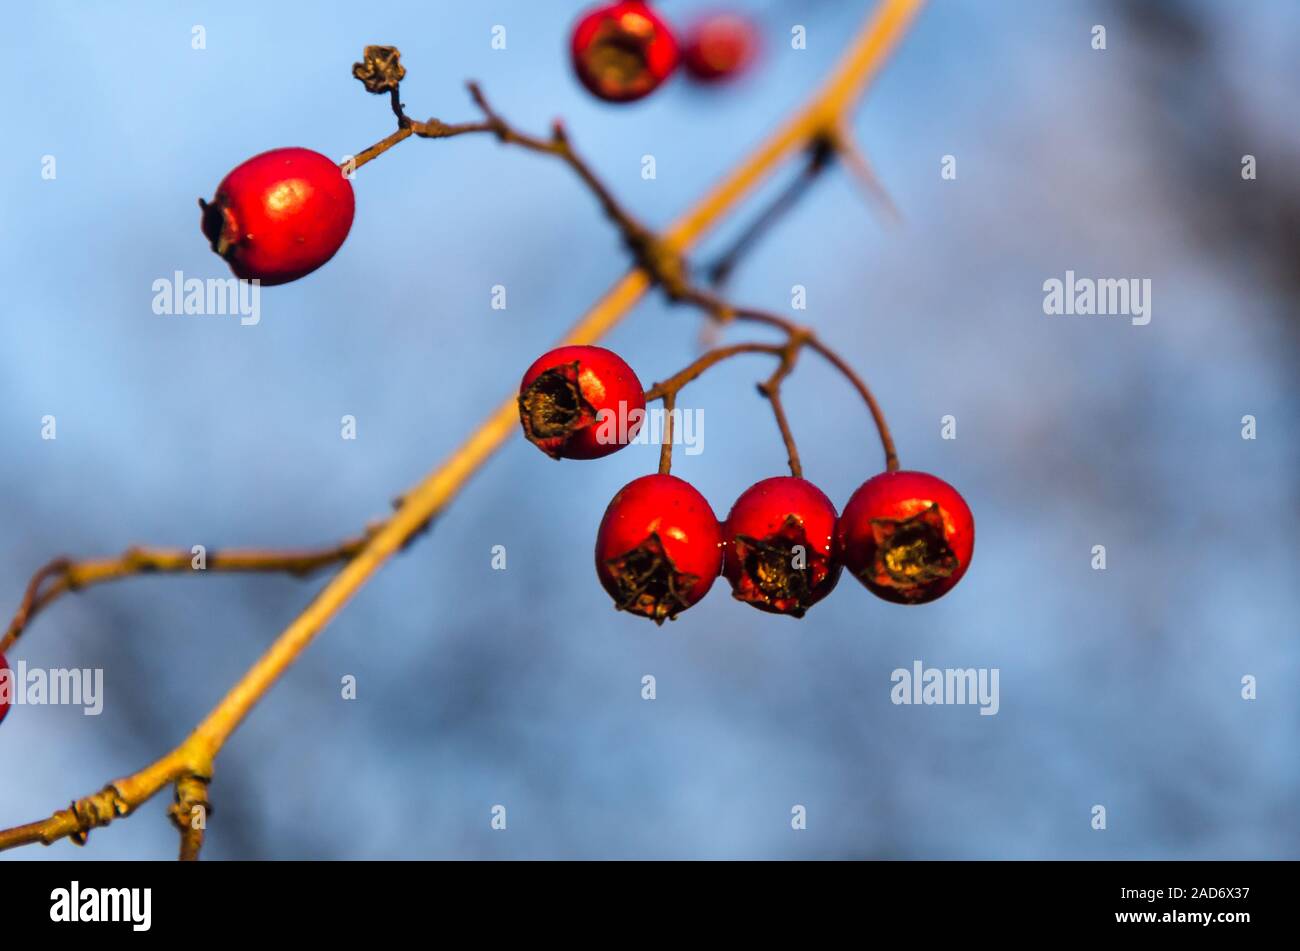 Red glowing hawthorn berries by a blue sky Stock Photo